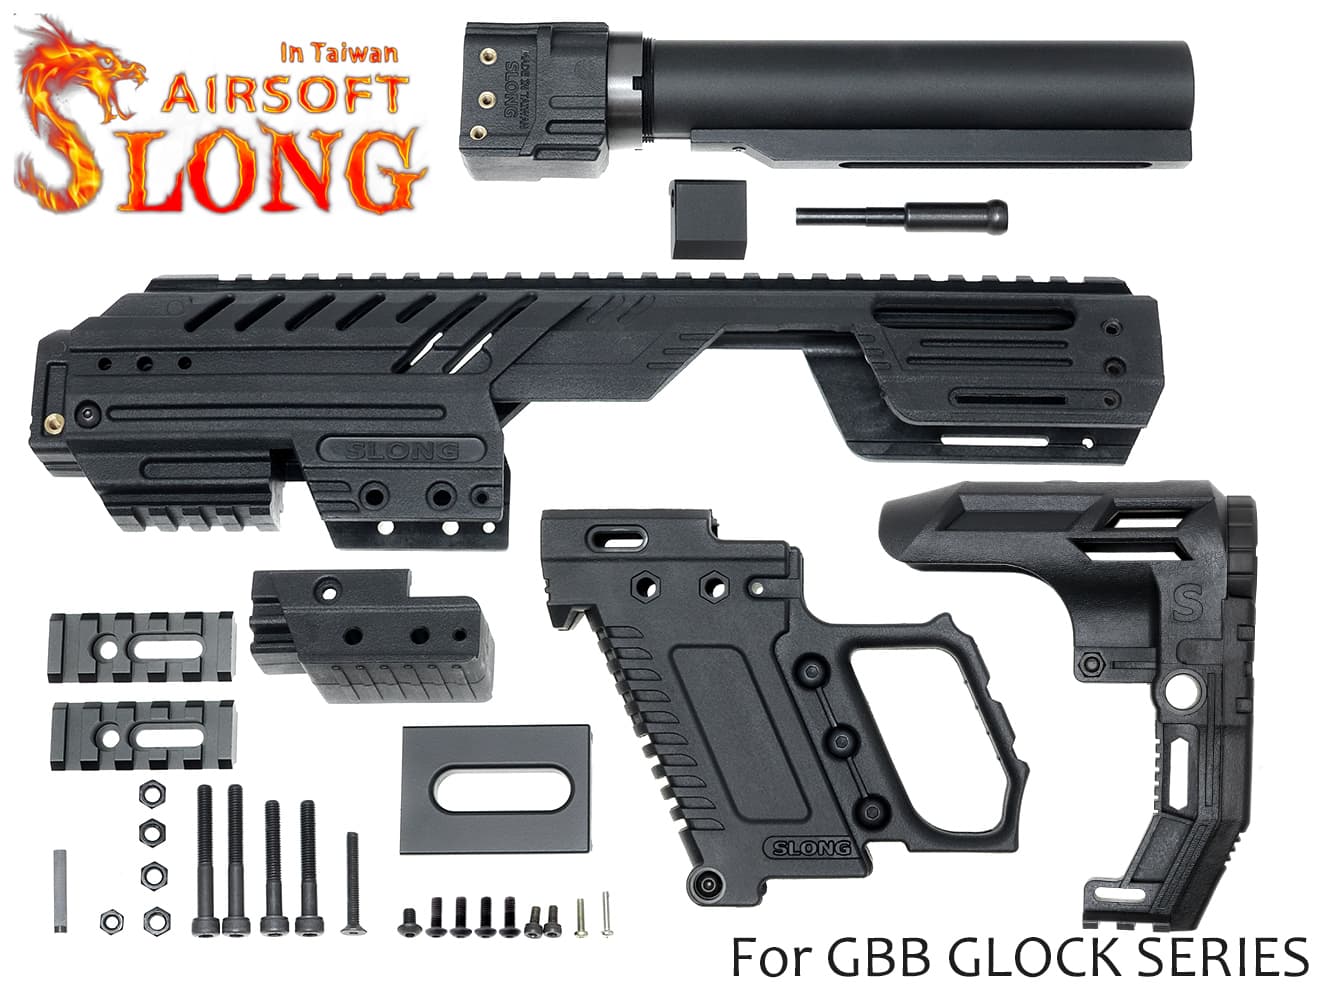 SLONG AIRSOFT MPG-KRISS XI コンバージョンキット for G17 / G18C